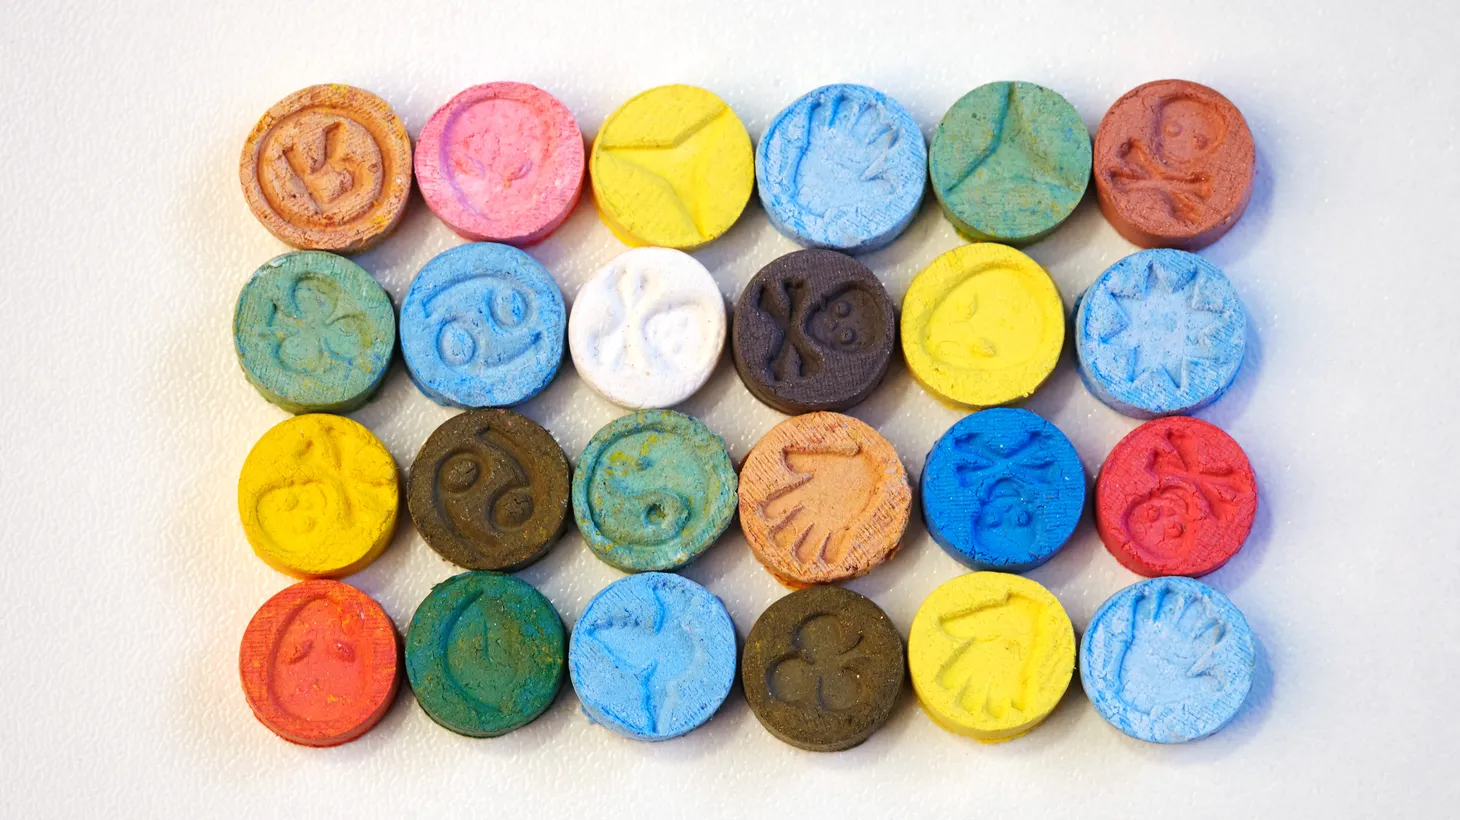 Several pills of MDMA sit on a white table. MDMA releases serotonin rather than mimicking the effects of serotonin, explains psychiatry professor Matthew Johnson.